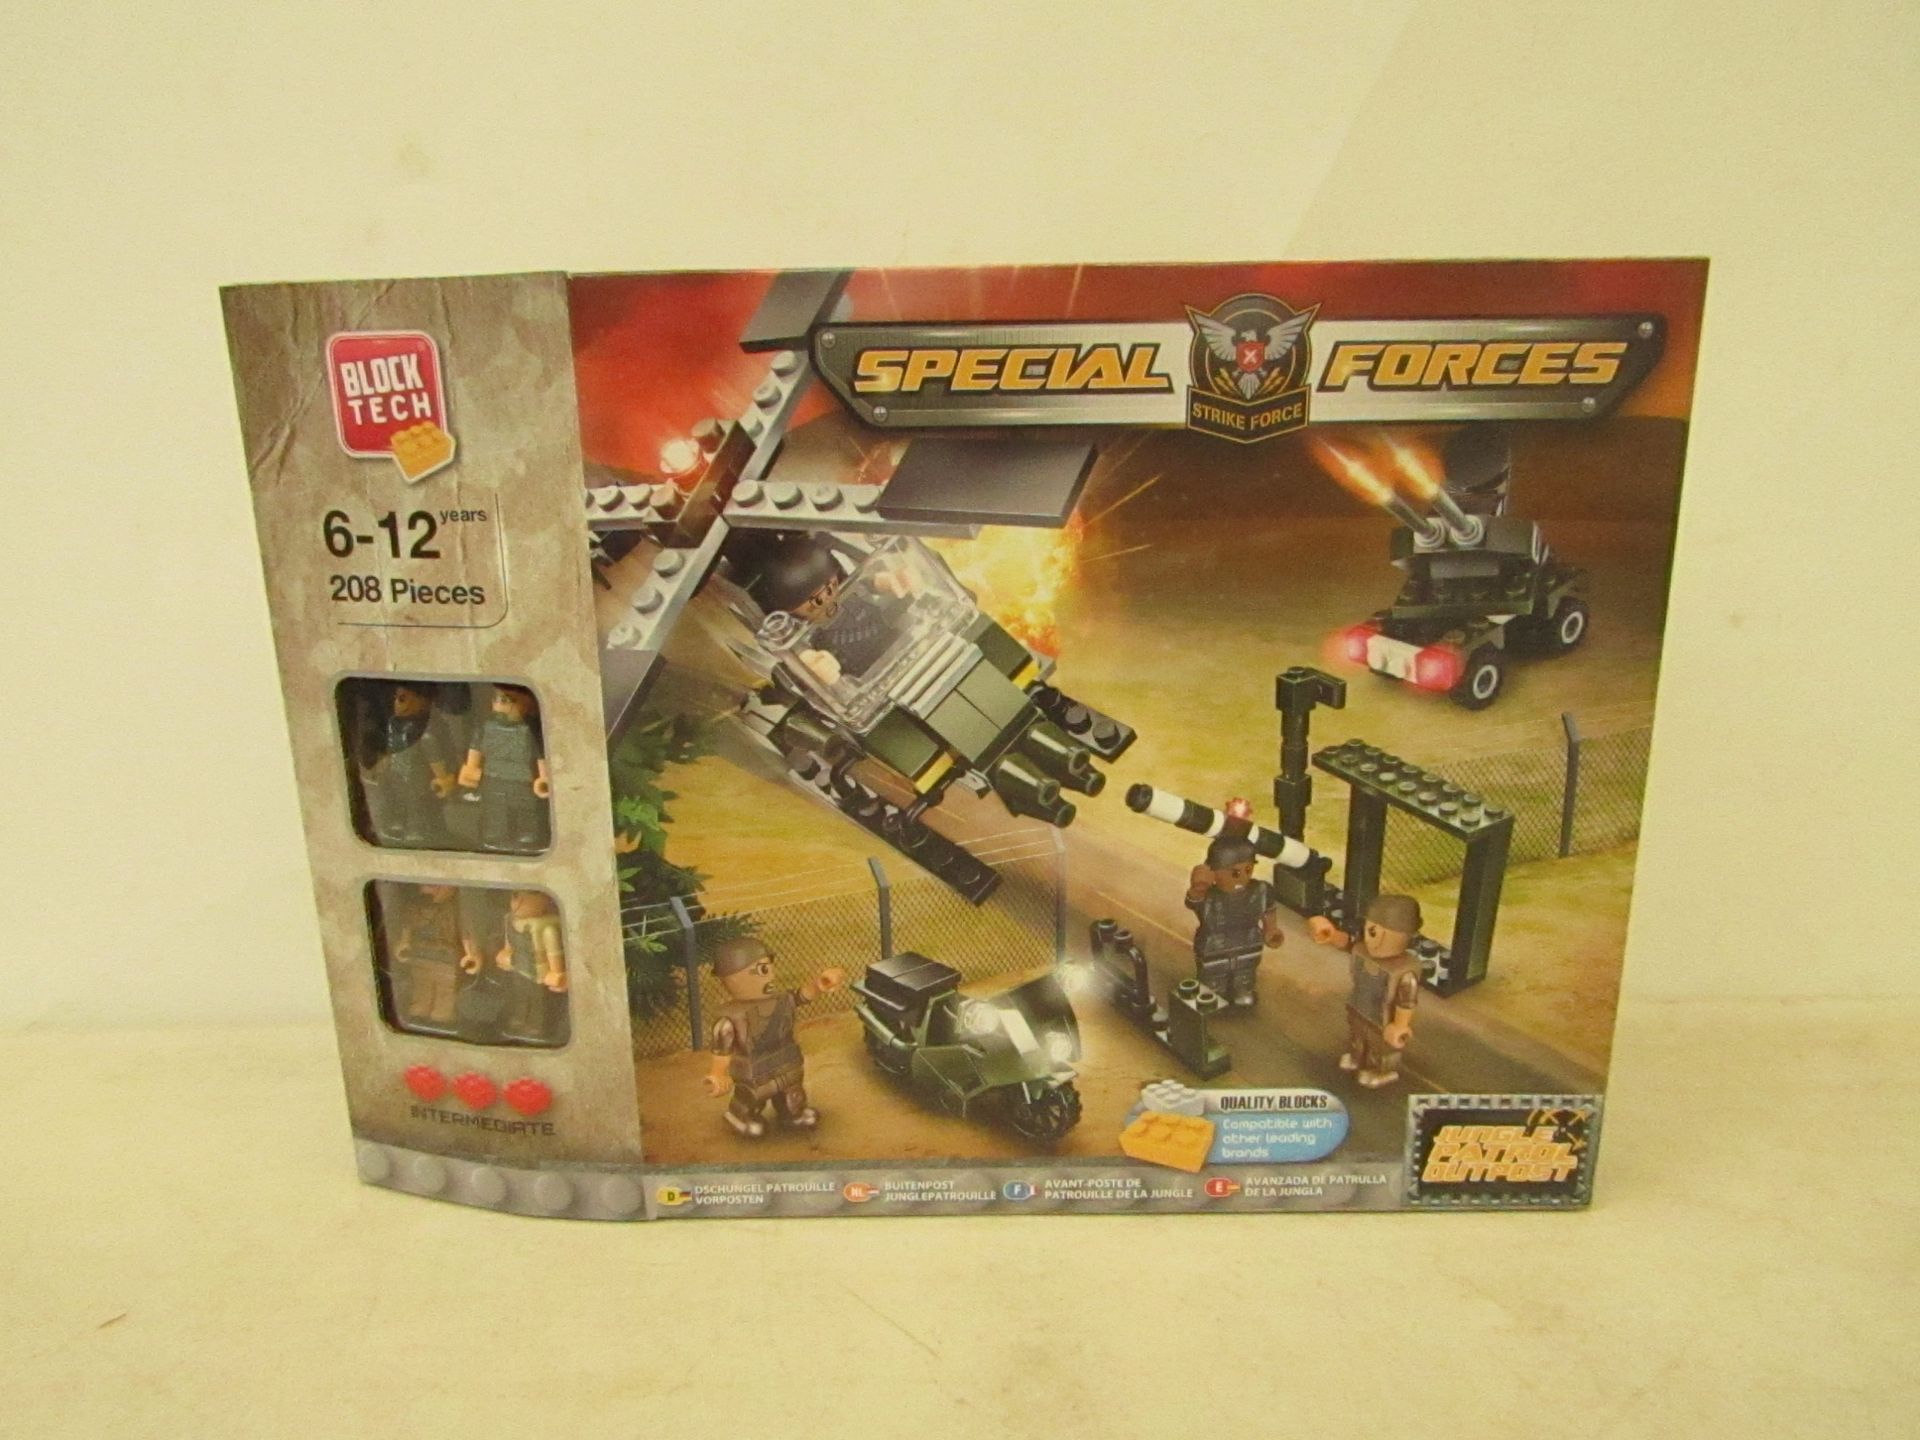 Block tech special forces set, 208 pcs, age 6-12, new and boxed.